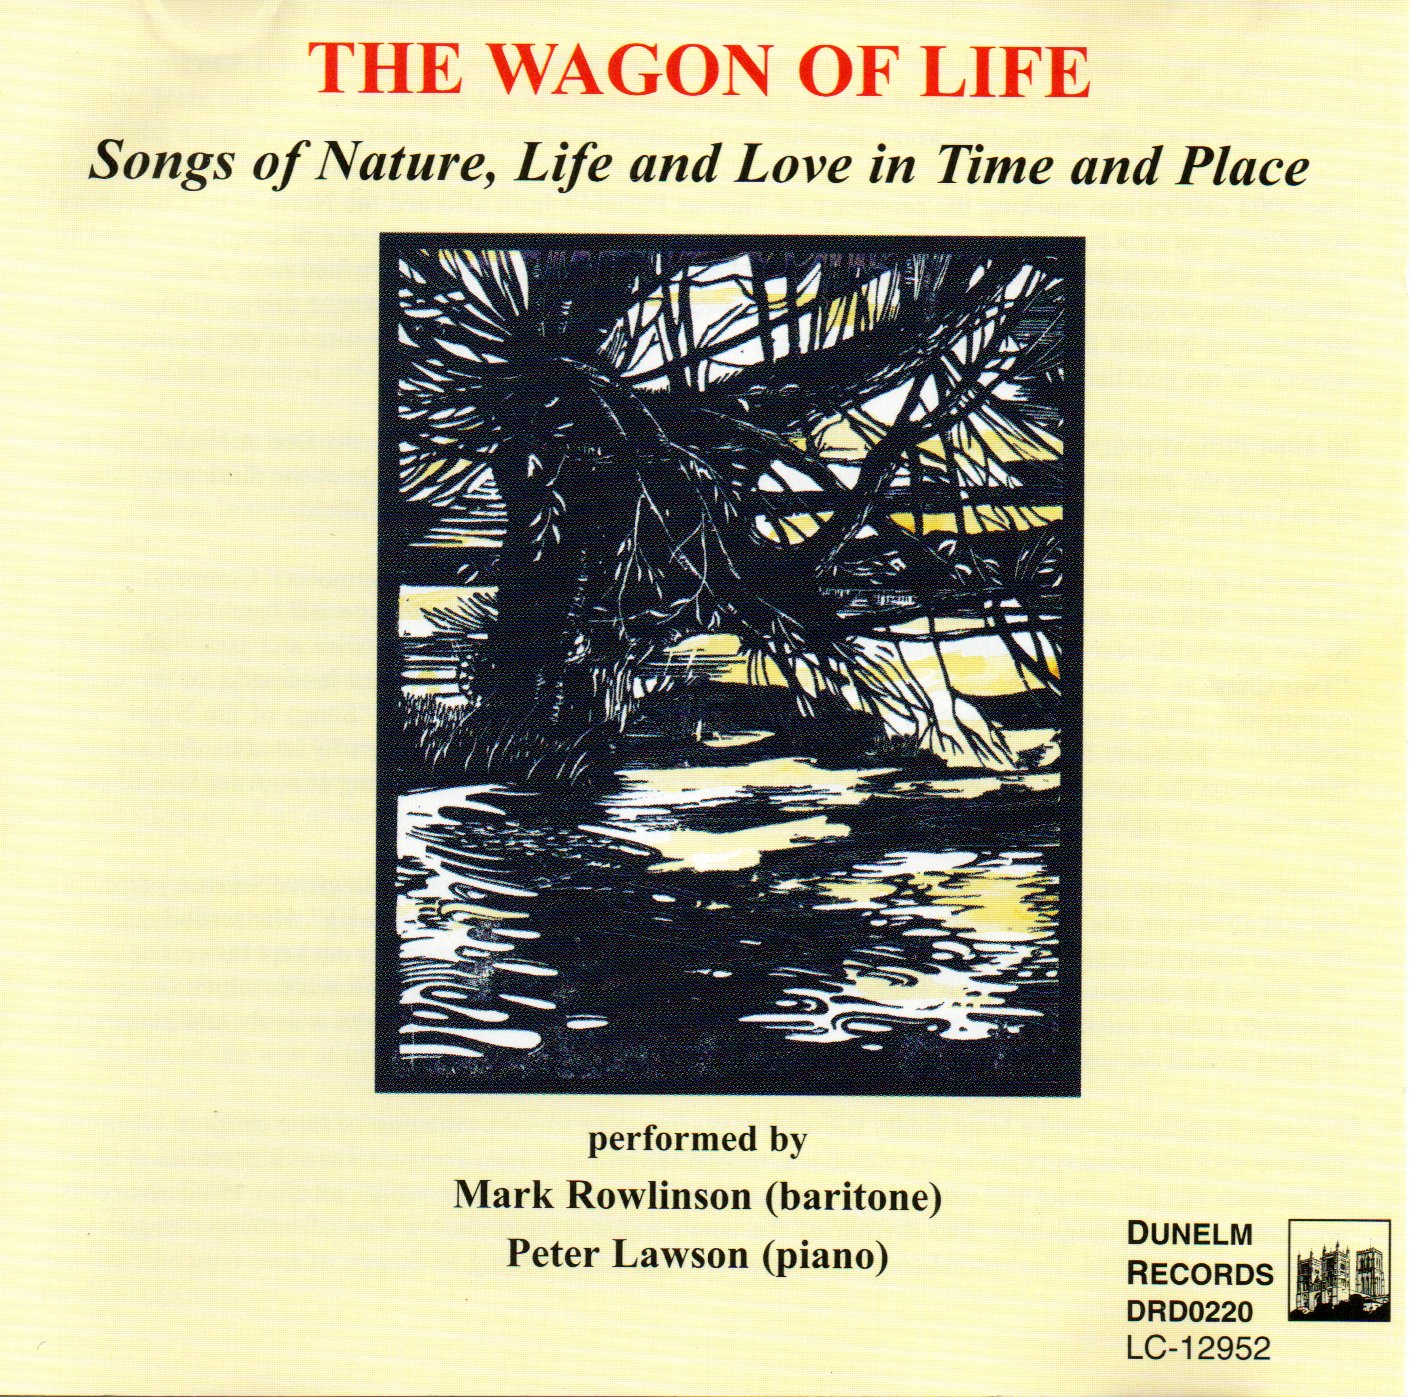 The Wagon of Life: Includes 'Dying Day' - a setting of 'Going'